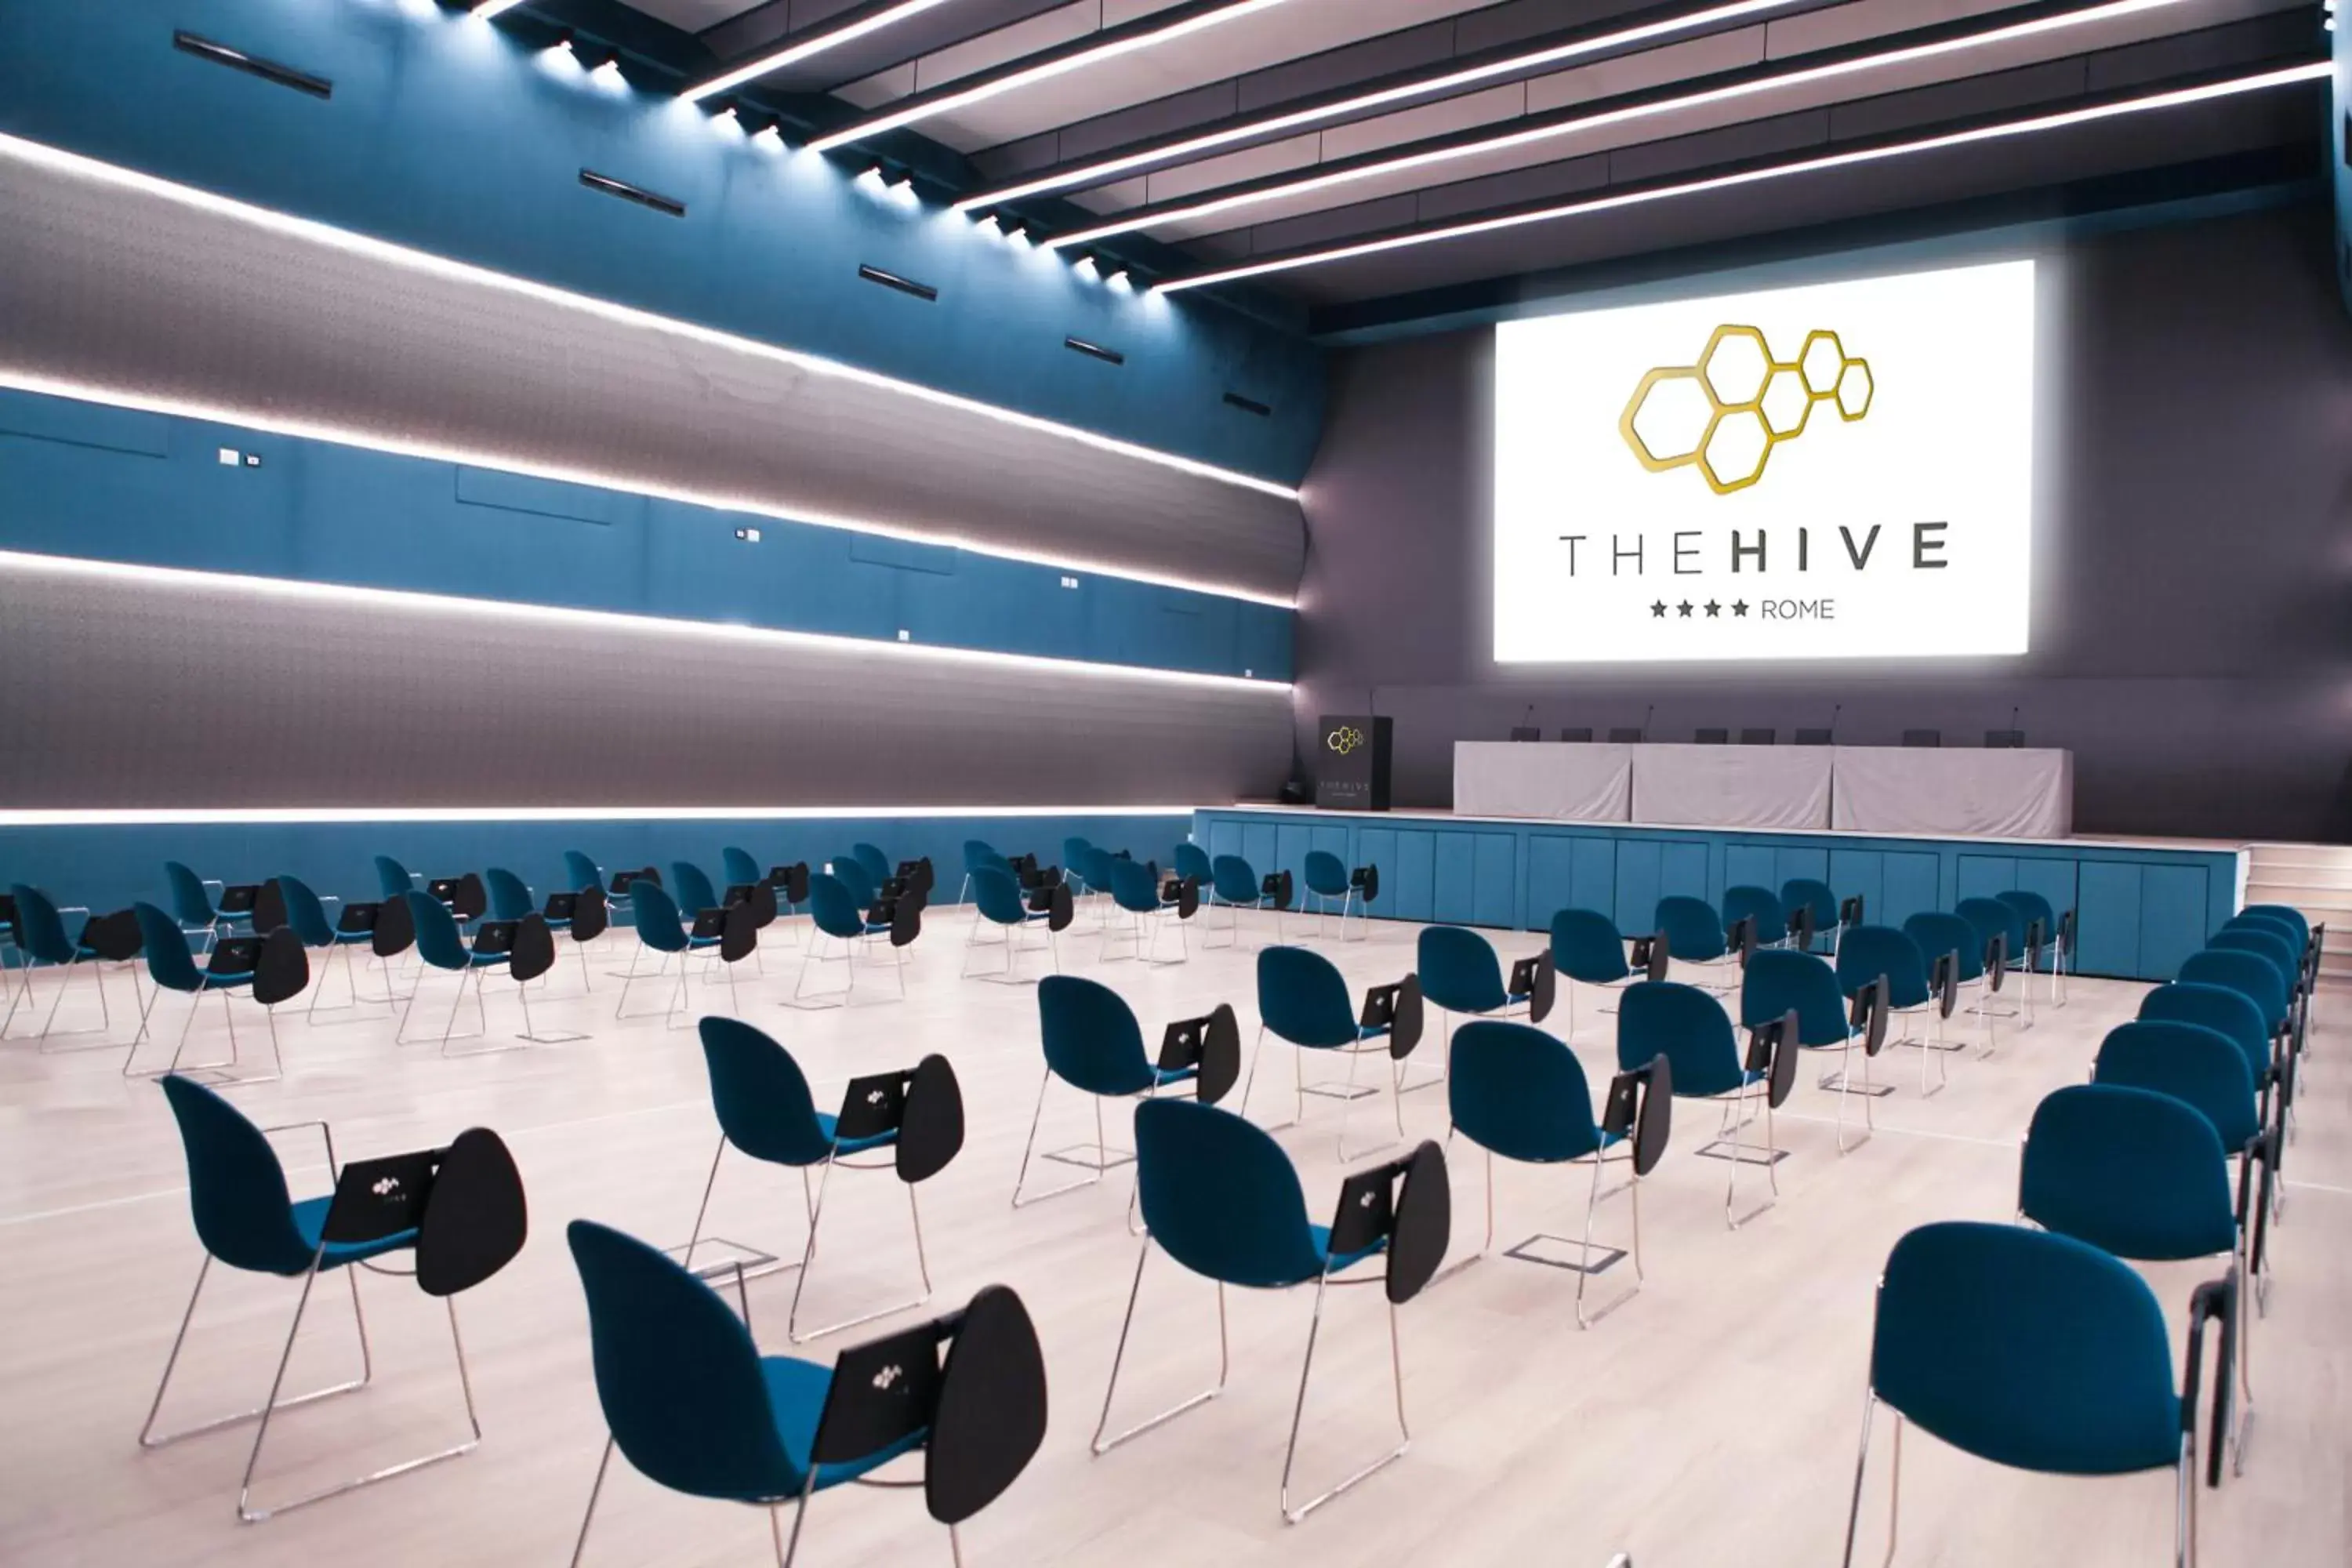 Business facilities in The Hive Hotel